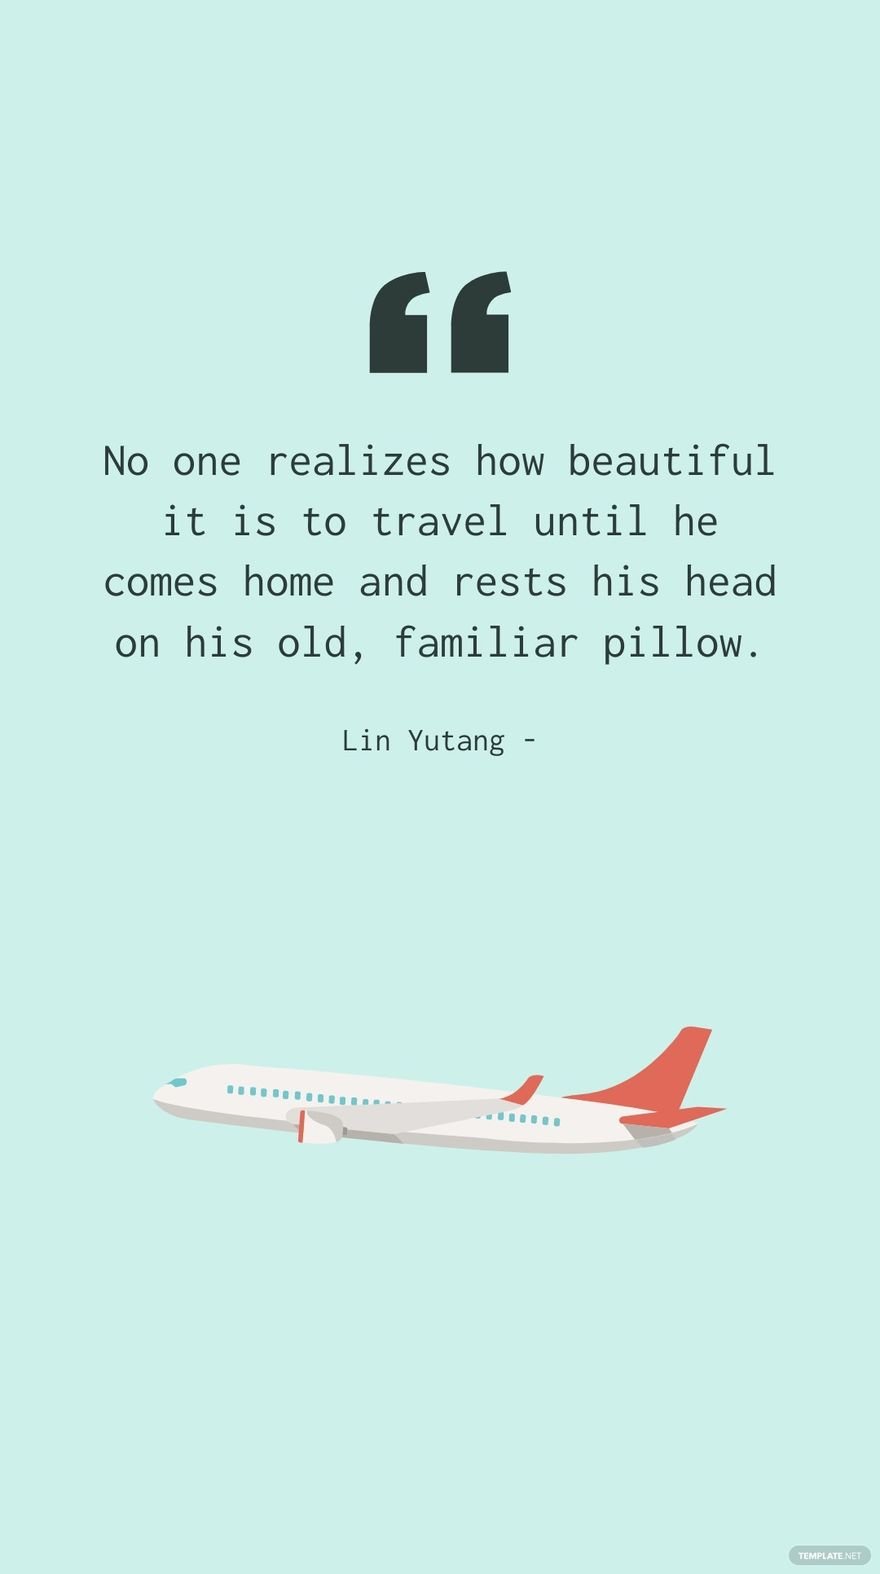 Lin Yutang - No one realizes how beautiful it is to travel until he comes home and rests his head on his old, familiar pillow.